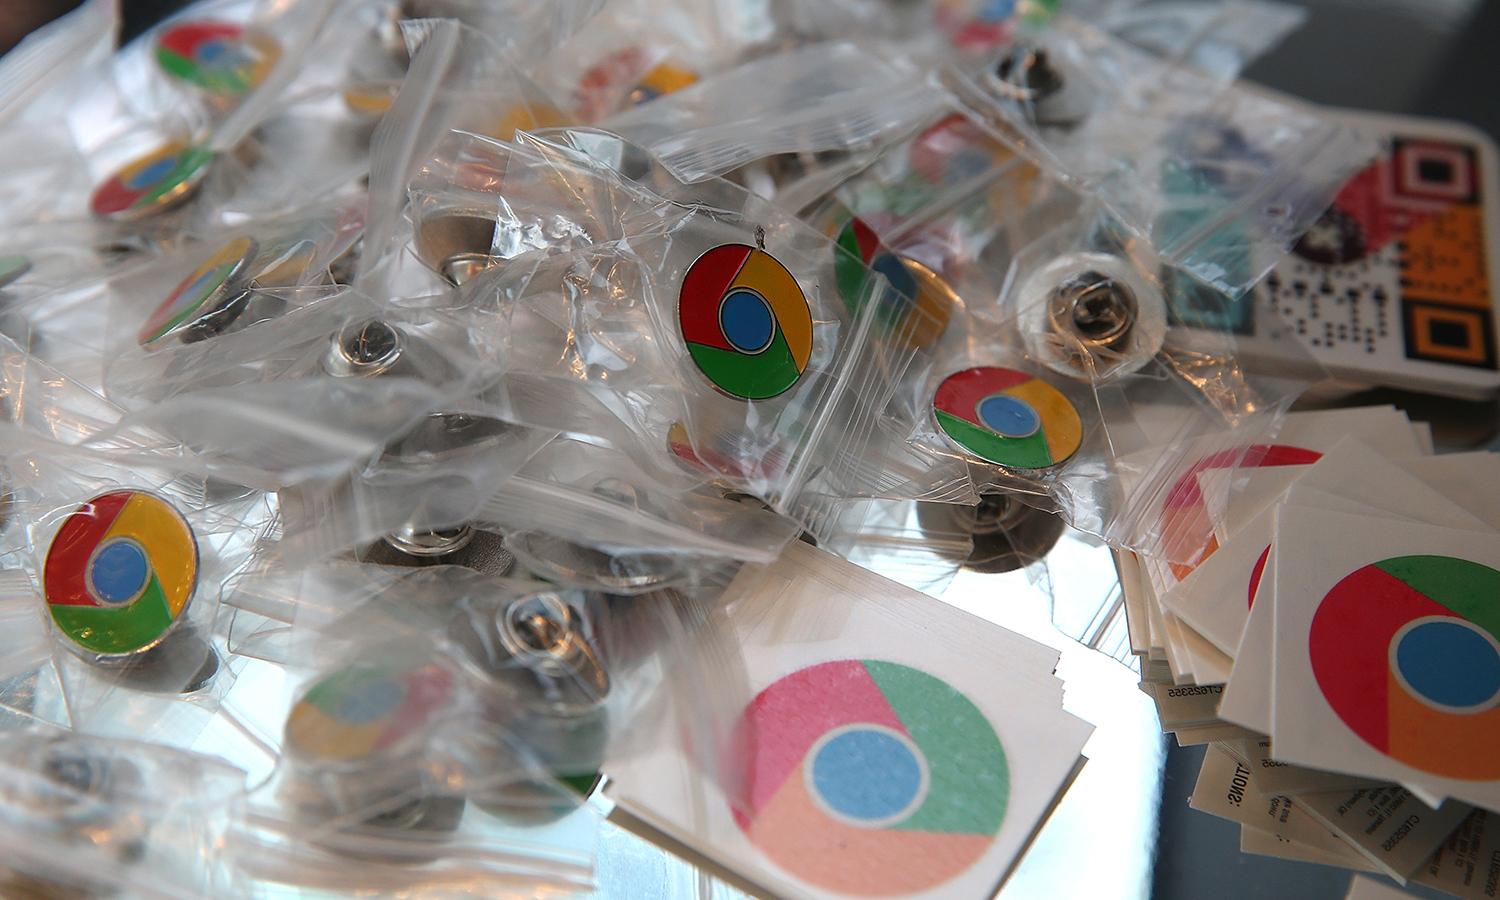 Pins and stickers of the Google Chrome icon